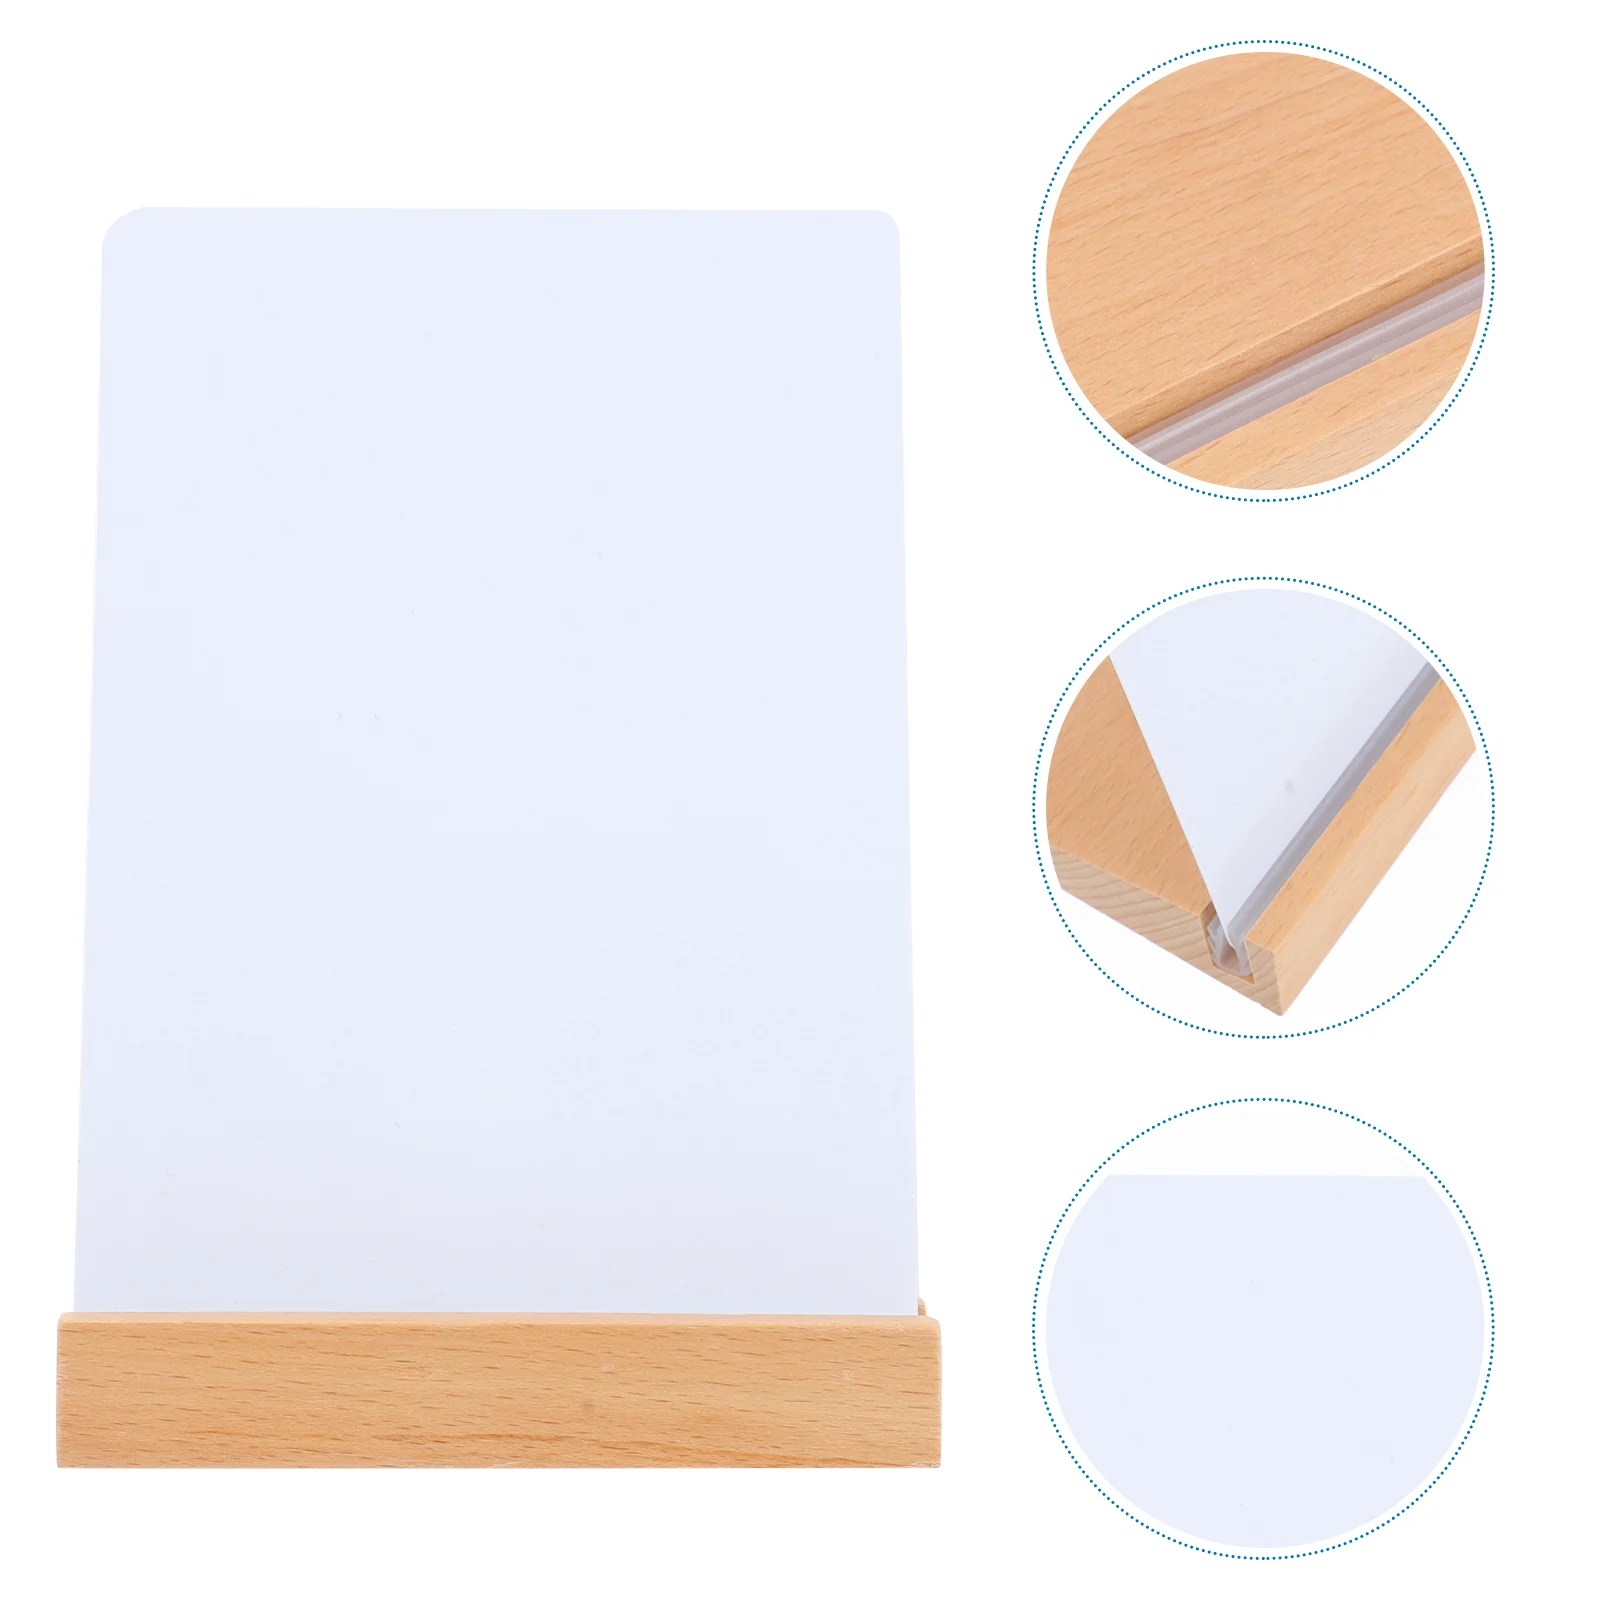 

Handwritten Price Tag Reusable Whiteboard Message Notice Chalkboard Practical Wood Base Beech Sign Memo Note Writing